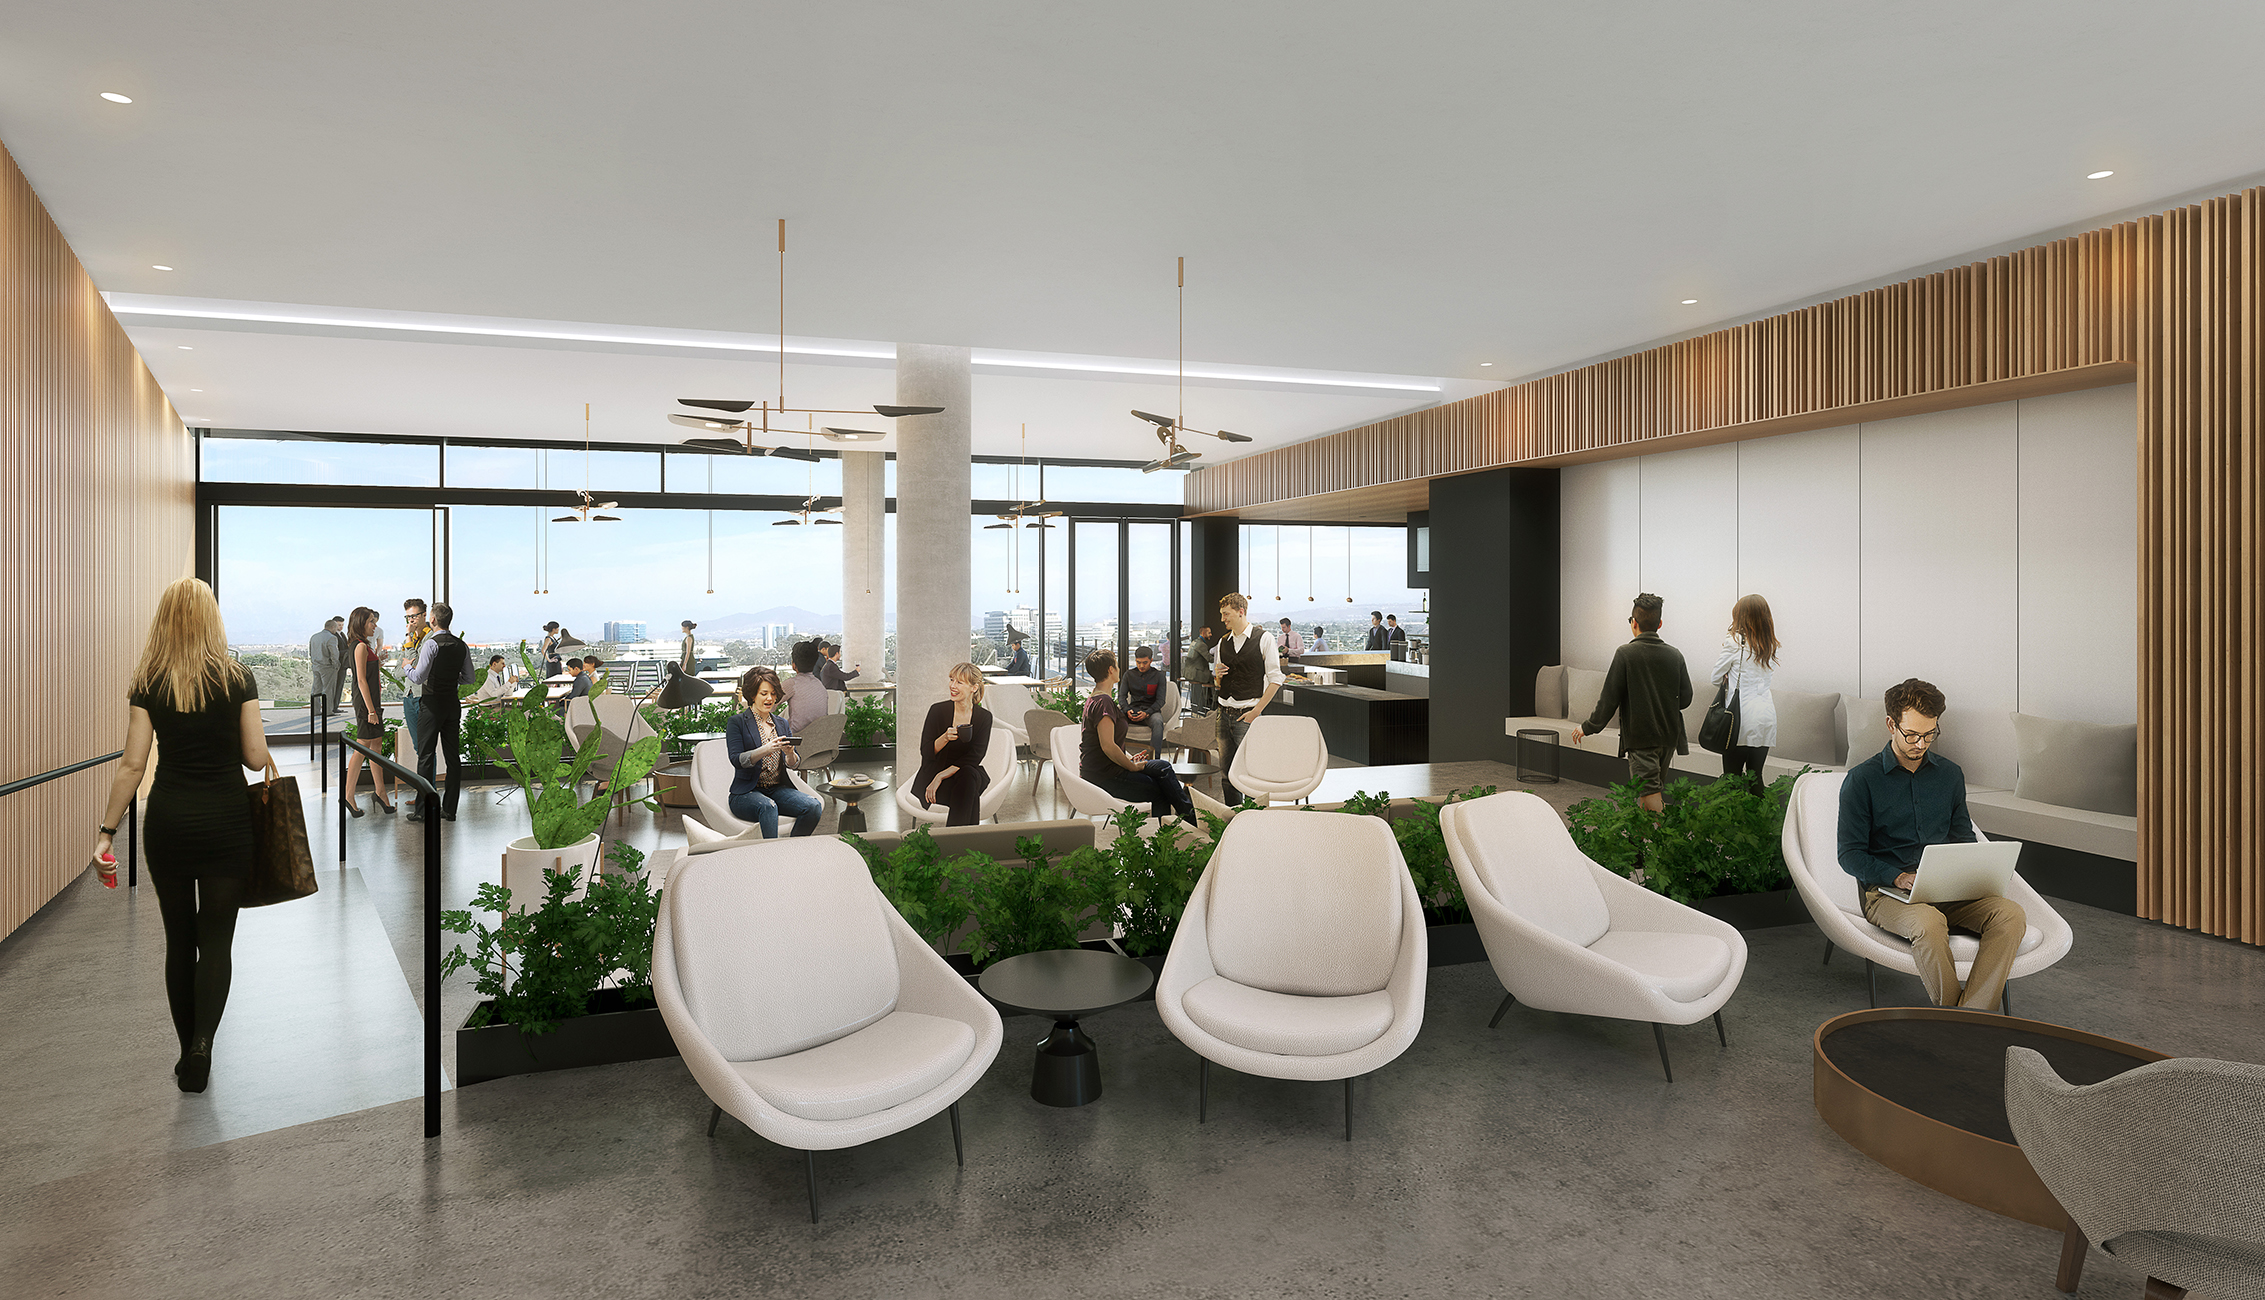 Rendering of lobby with soft seating, green plants, and large windows with views to blue sky